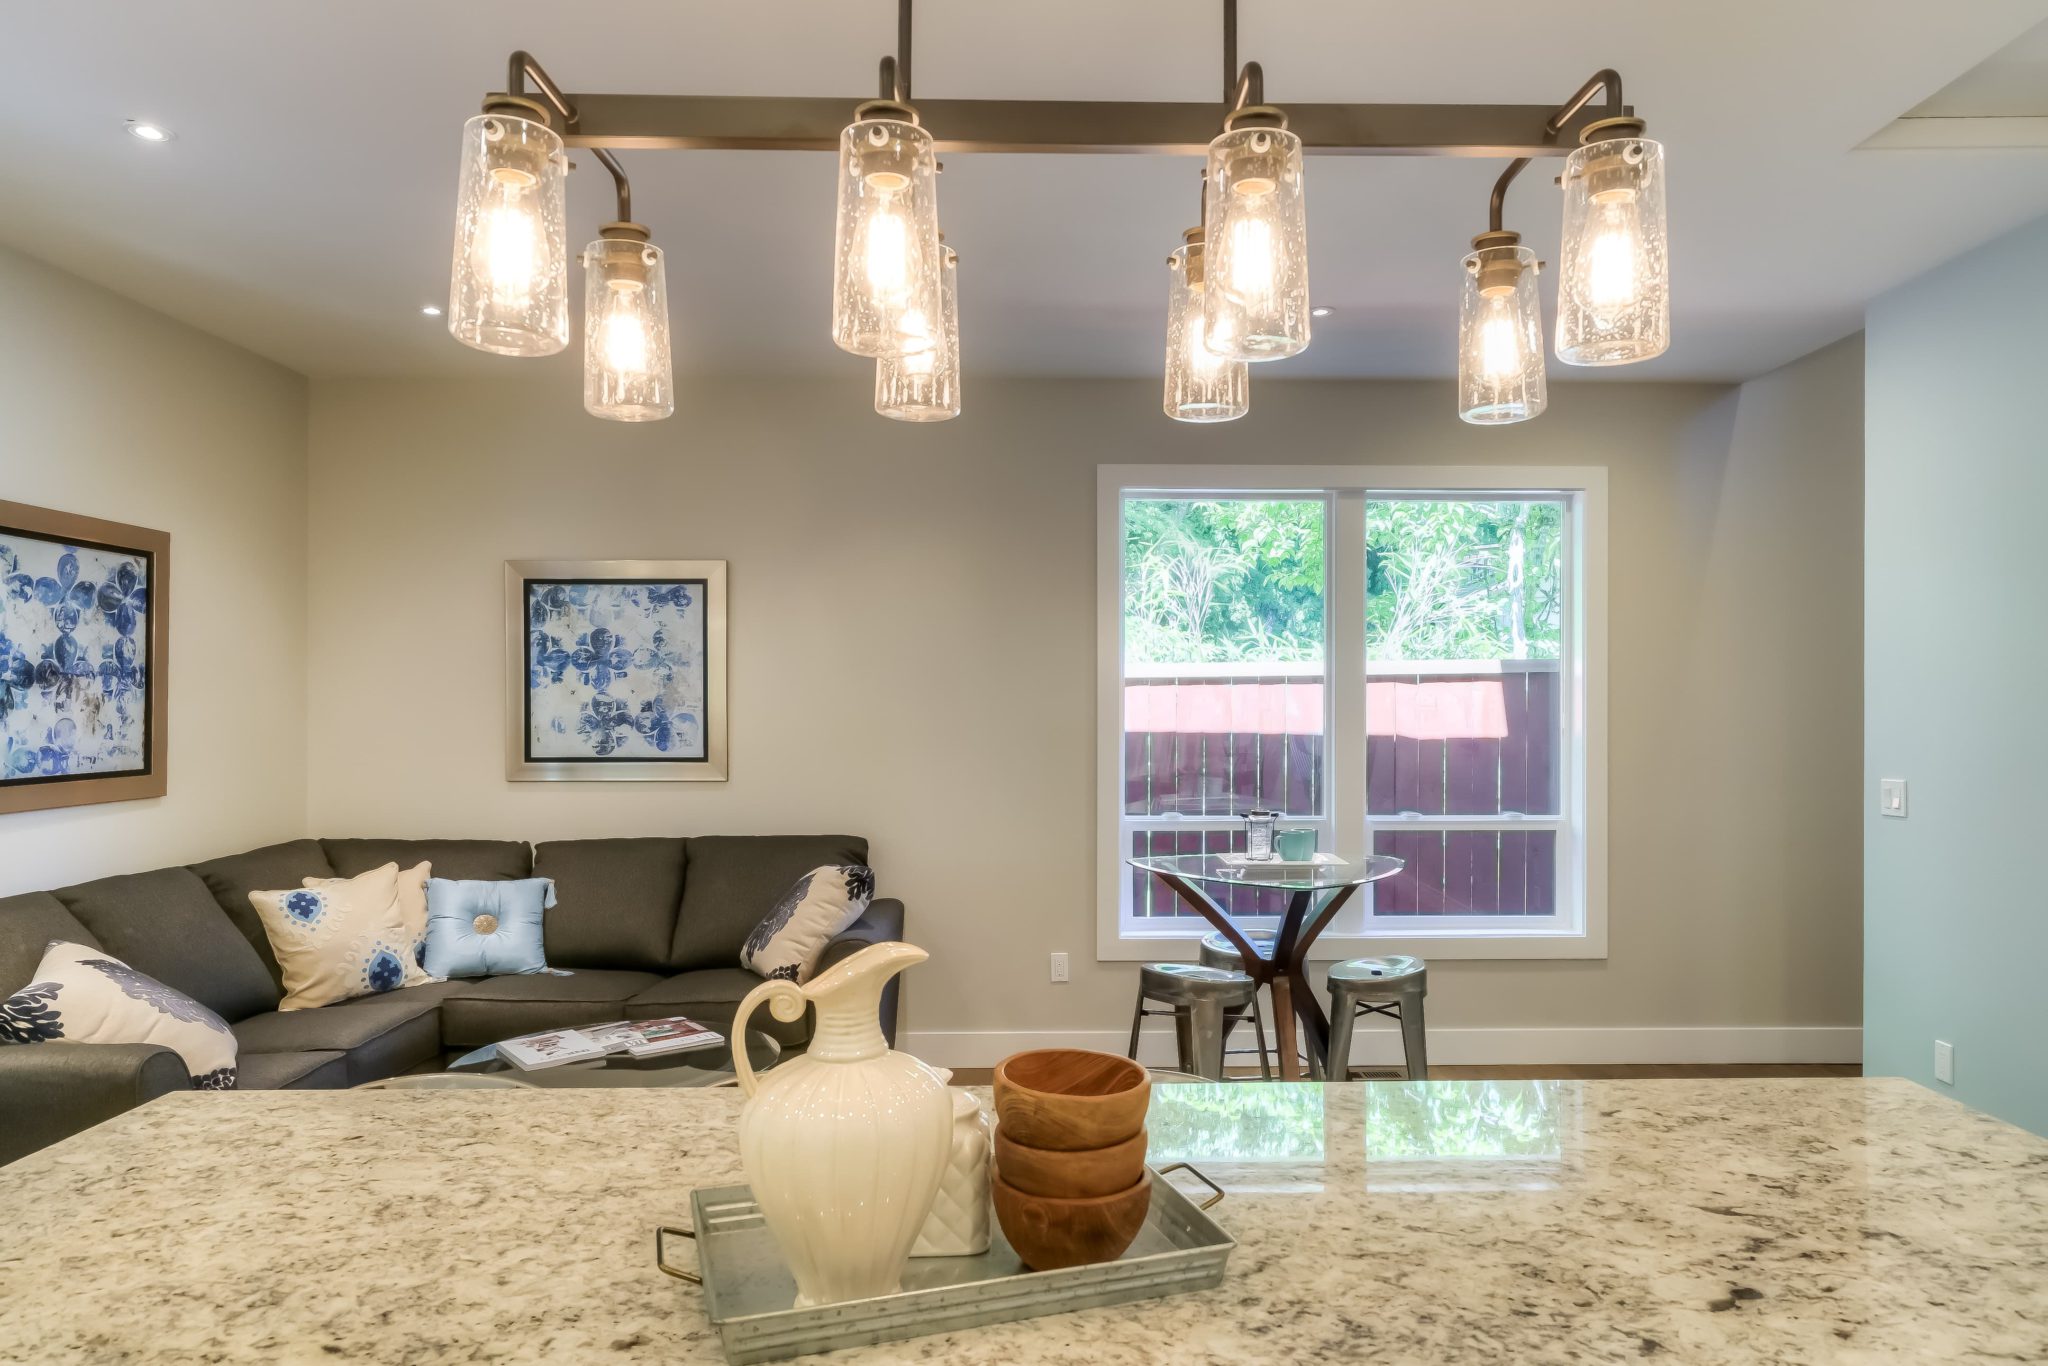 2017 Tour Homes kitchen area lighting inside the house